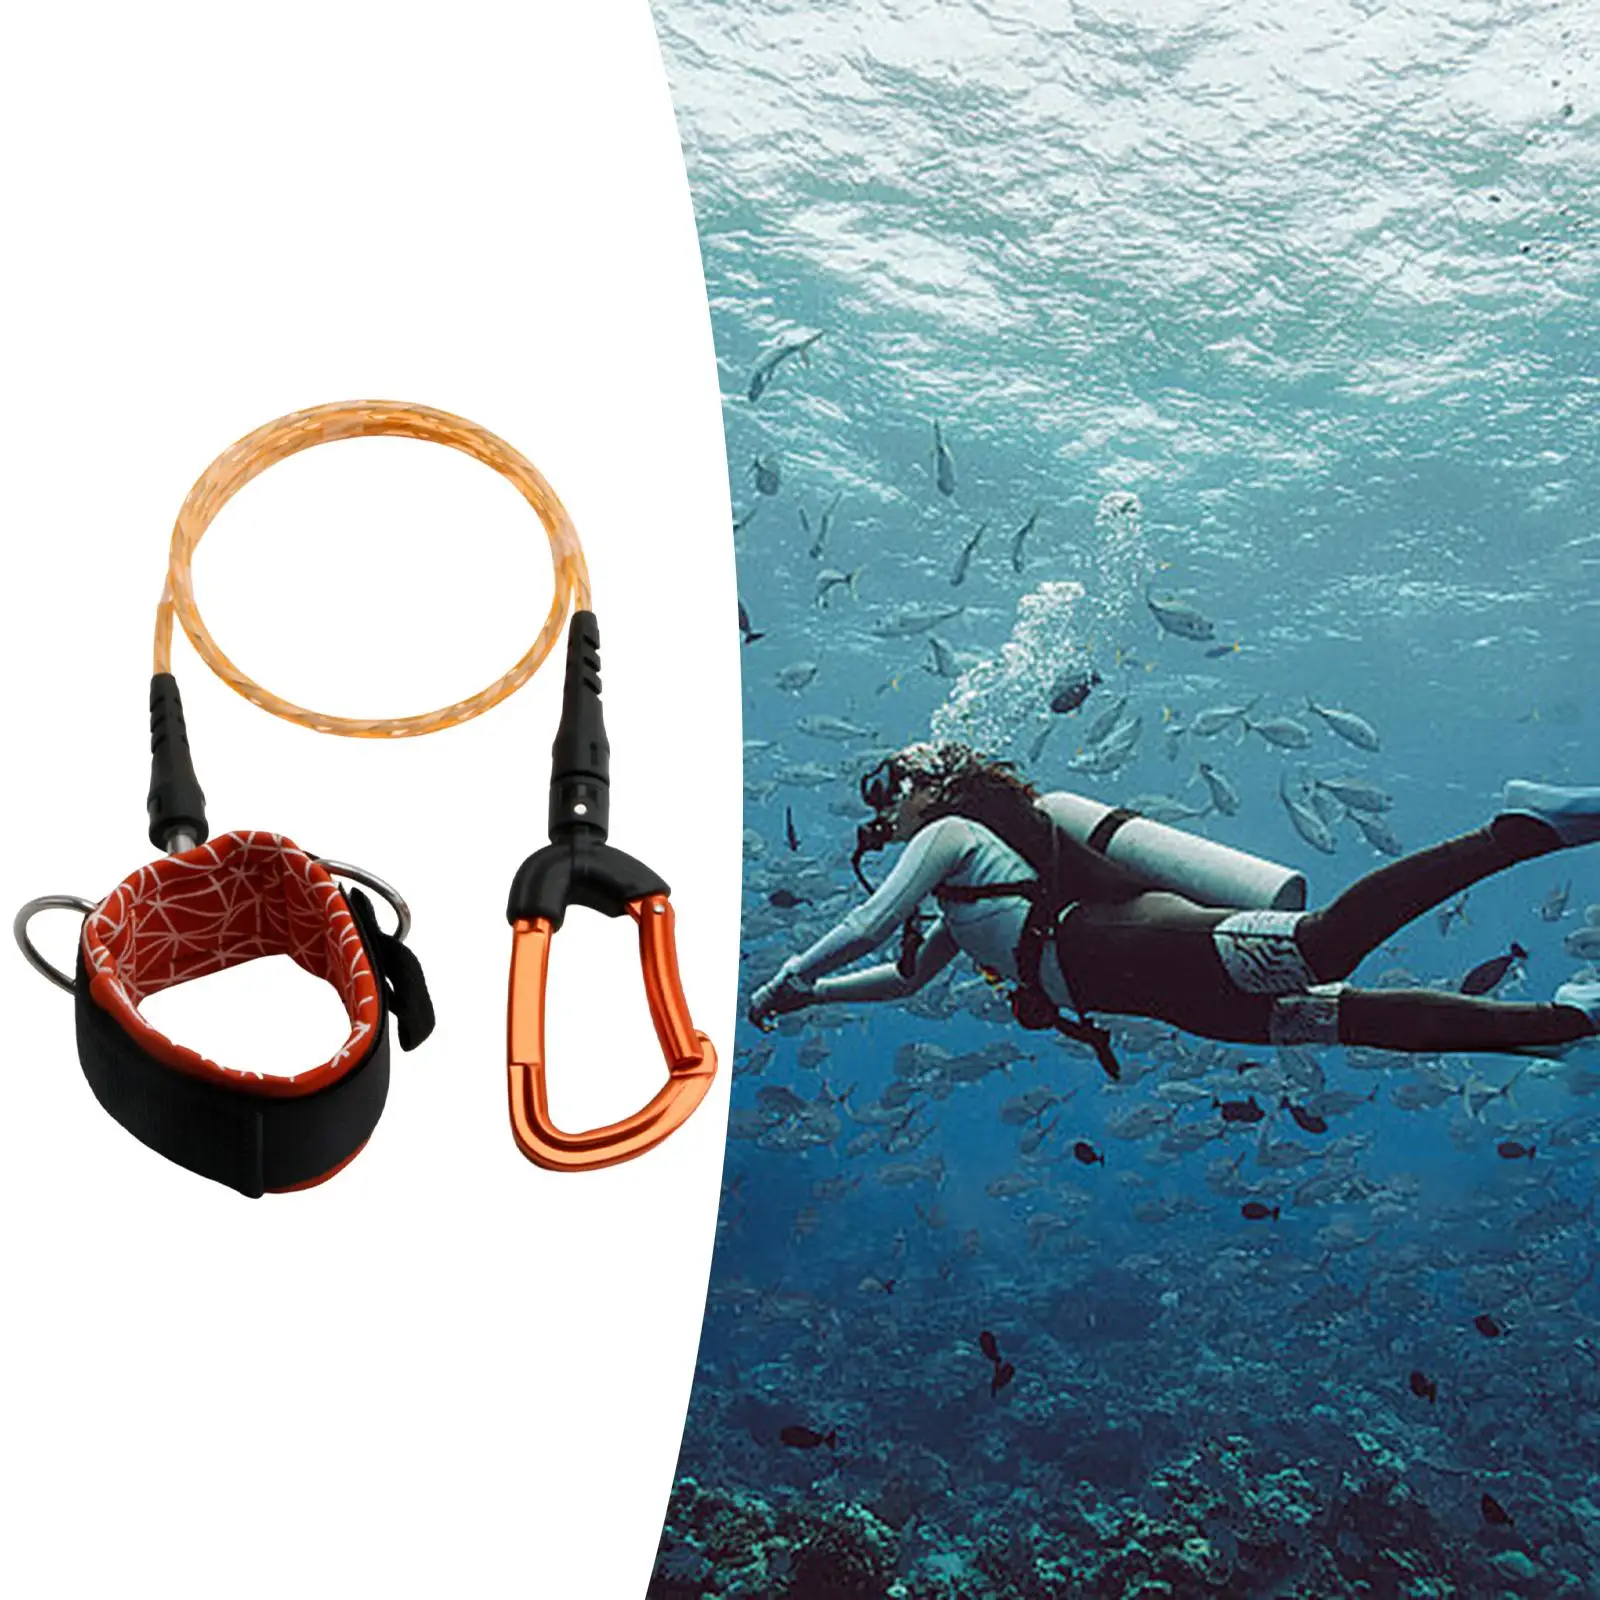 Freediving Lanyard Leash Adjustable Wrist Lanyard Professional Diving Safety Rope for Freediving Scuba Diving Underwater Sports